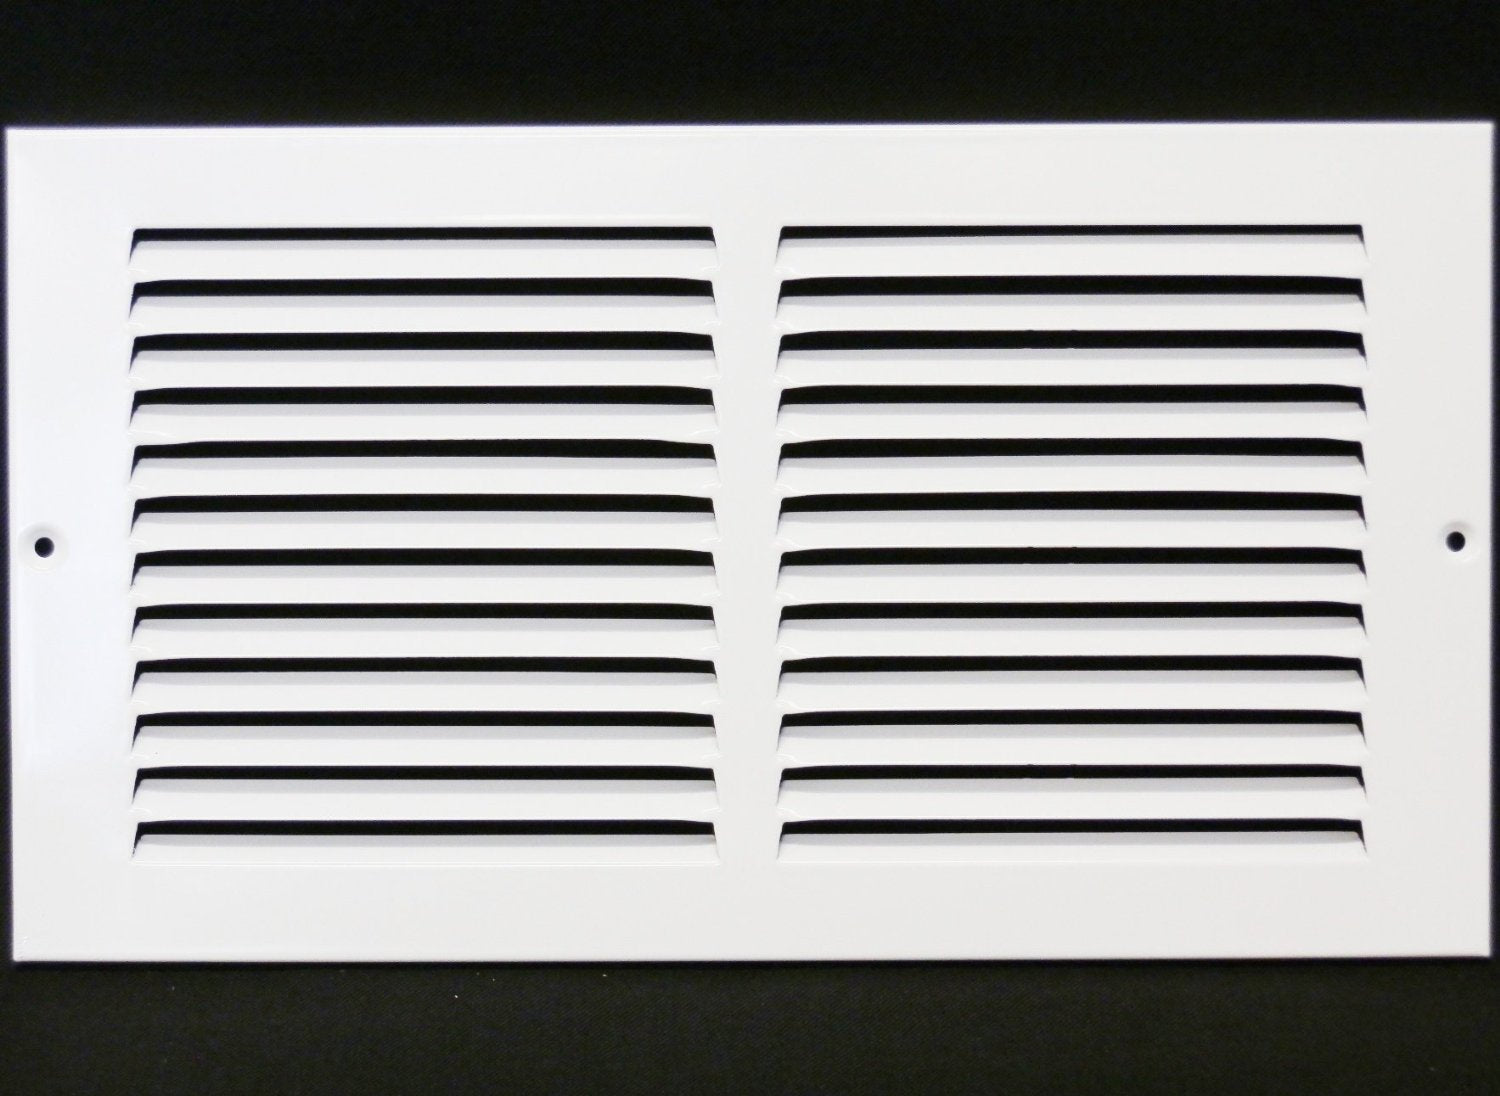 12" X 4" Air Vent Return Grilles - Sidewall and Ceiling - Steel